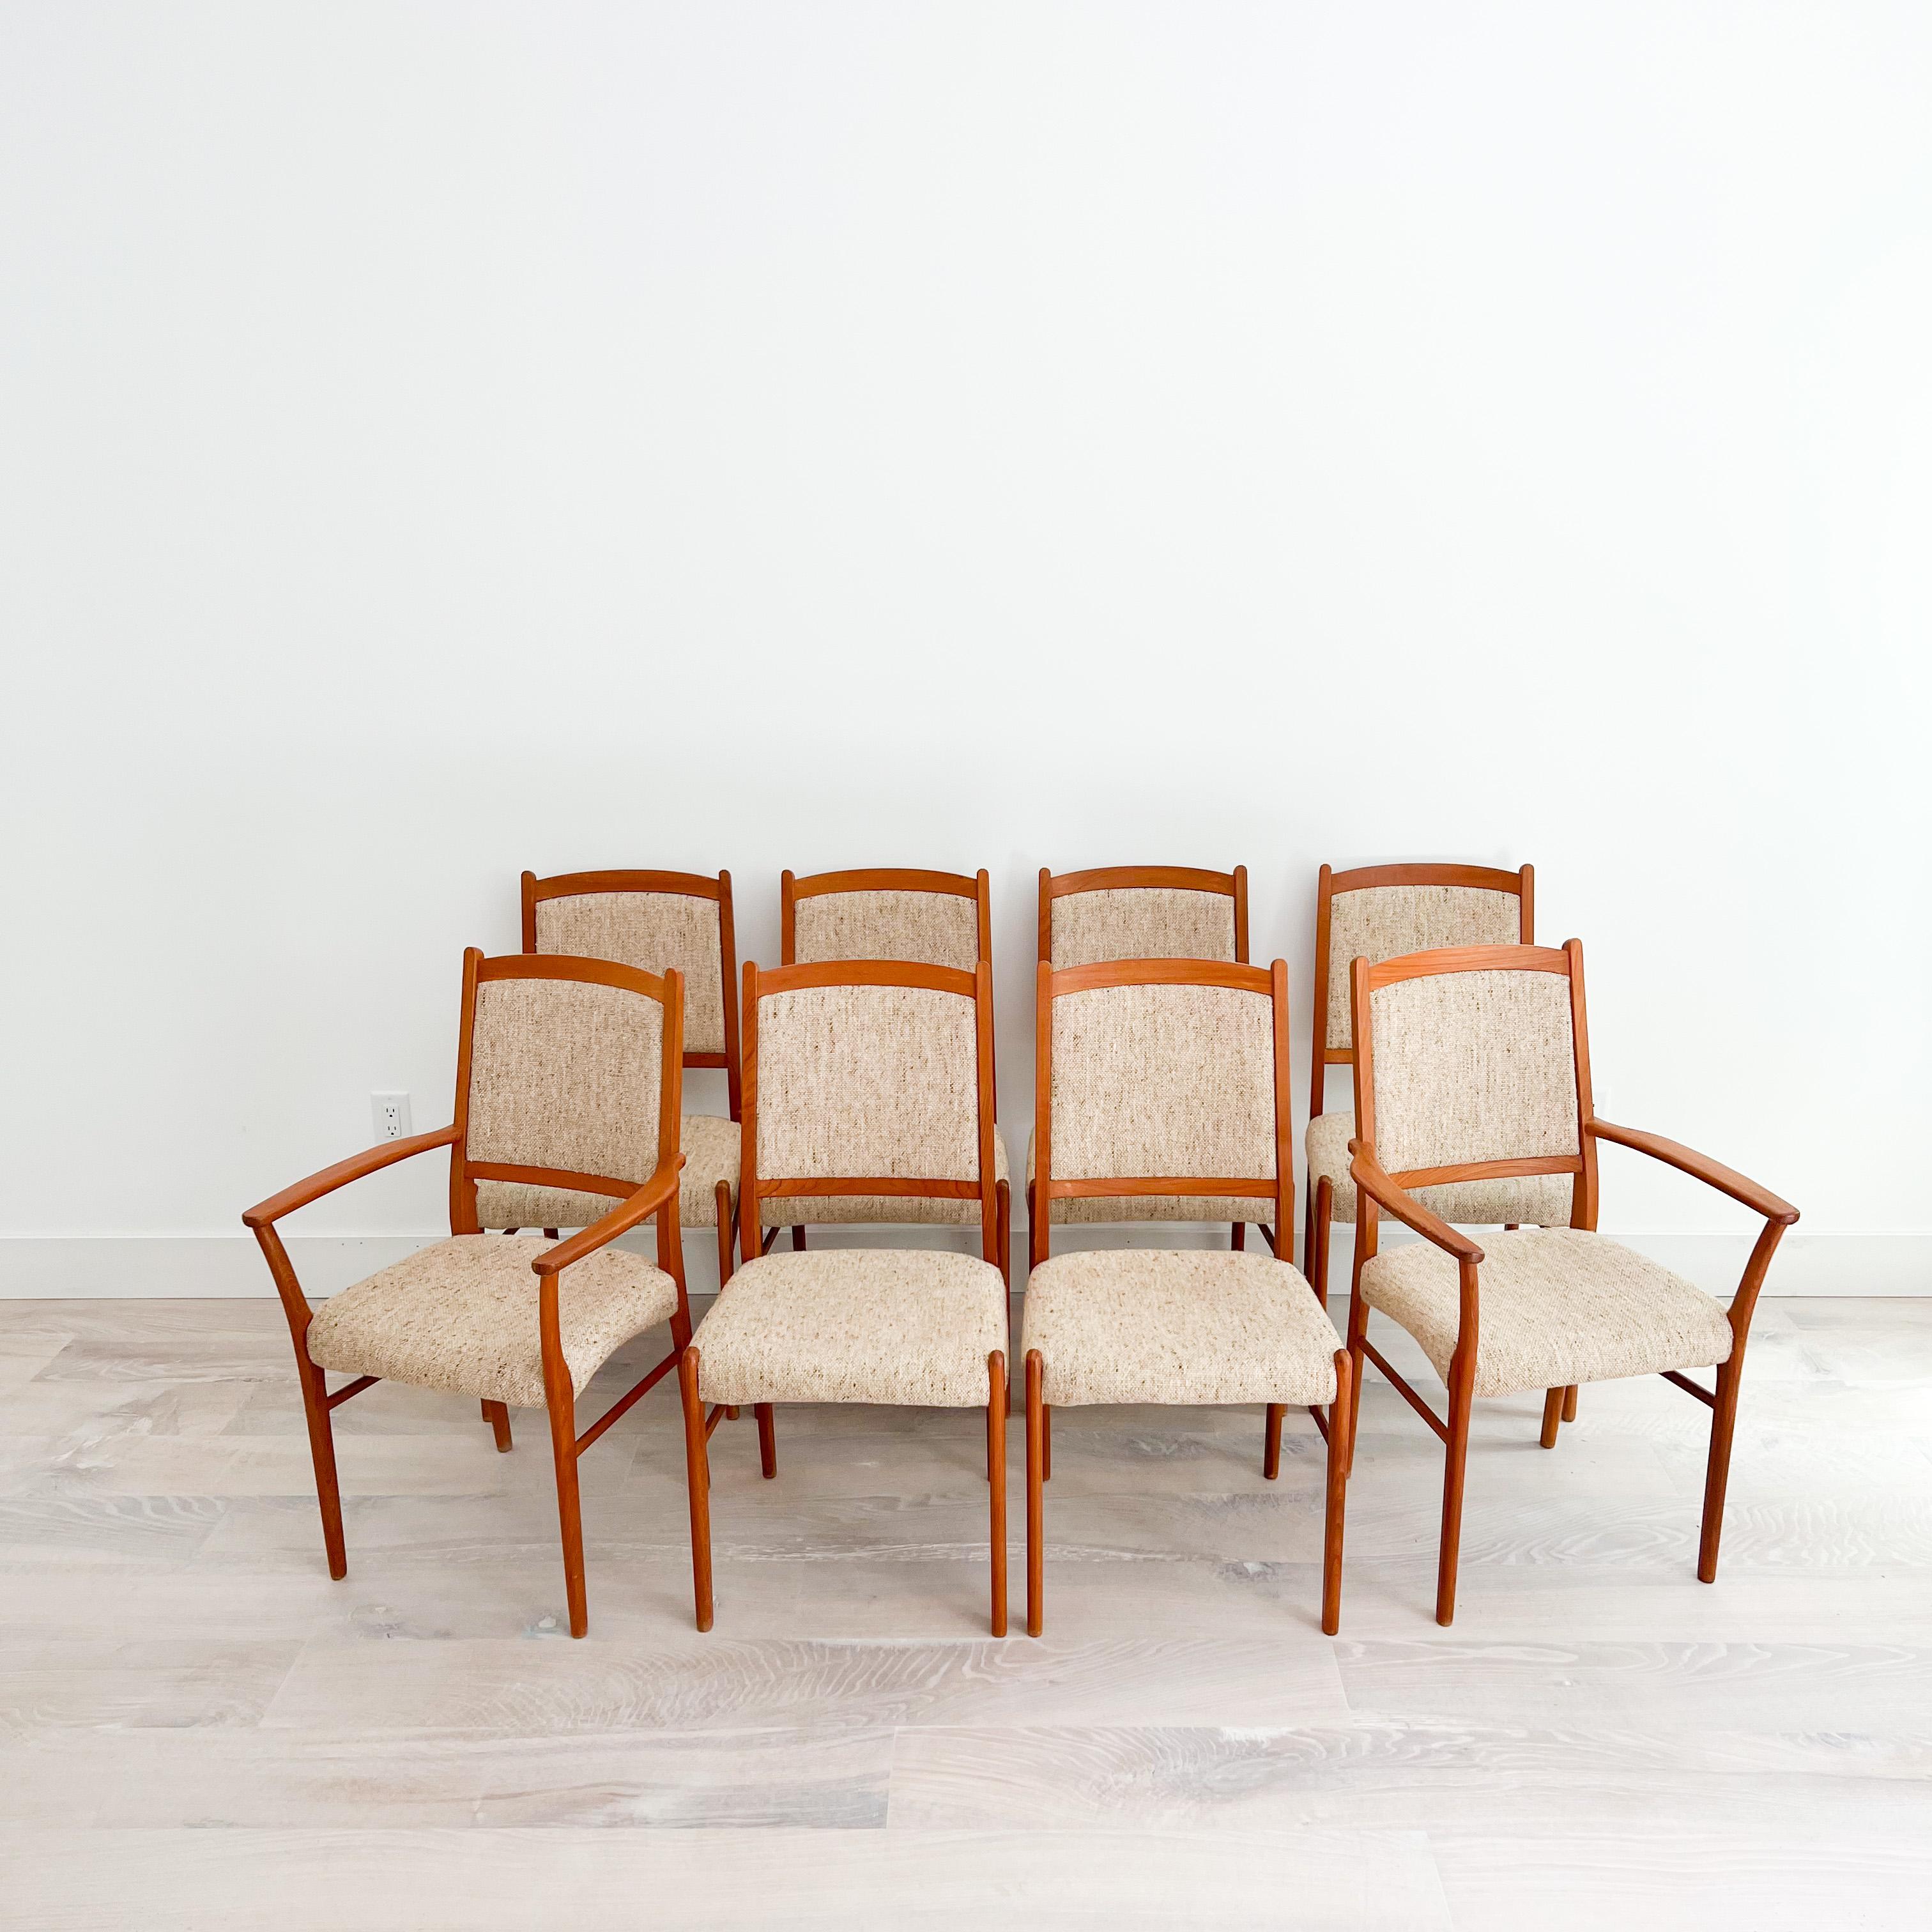 Set of 8 Mid-Century Modern Danish teak dining chairs with original upholstery. The upholstery is in good condition overall but does have some light piling from age appropriate wear. The teak has some light scuffing/scratching to the teak frames.